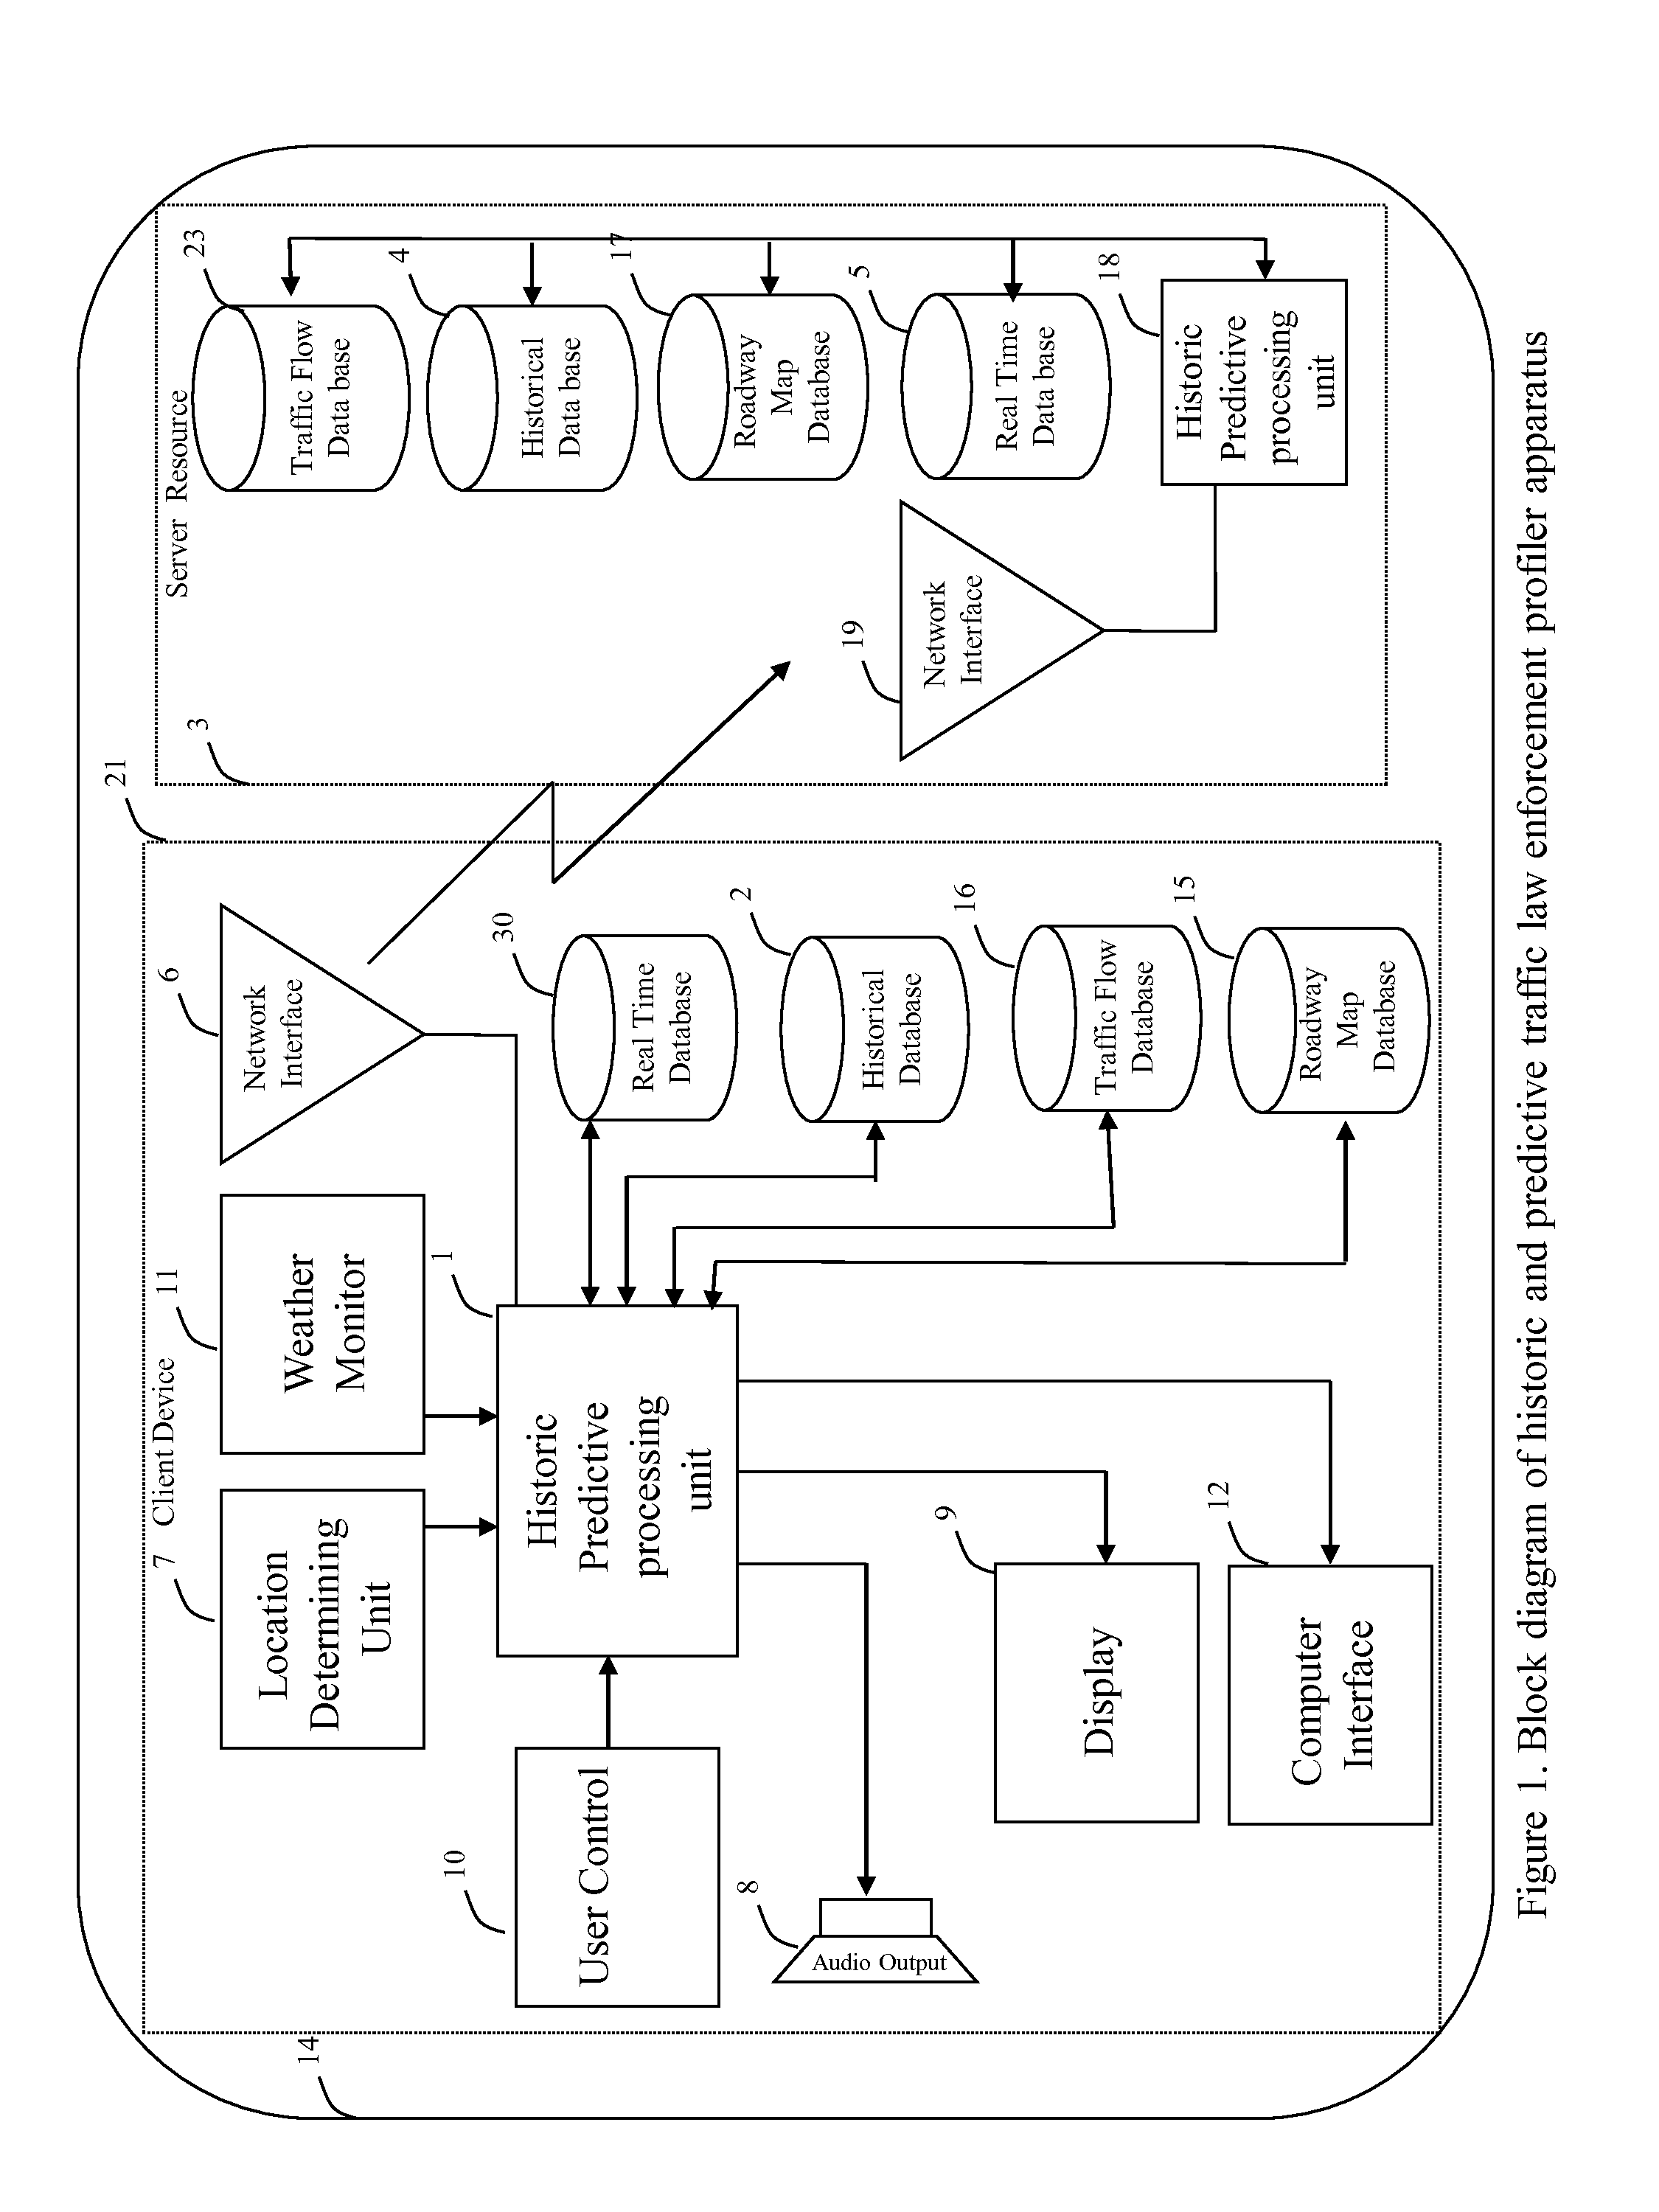 Method and apparatus for providing estimated patrol properties and historic patrol records